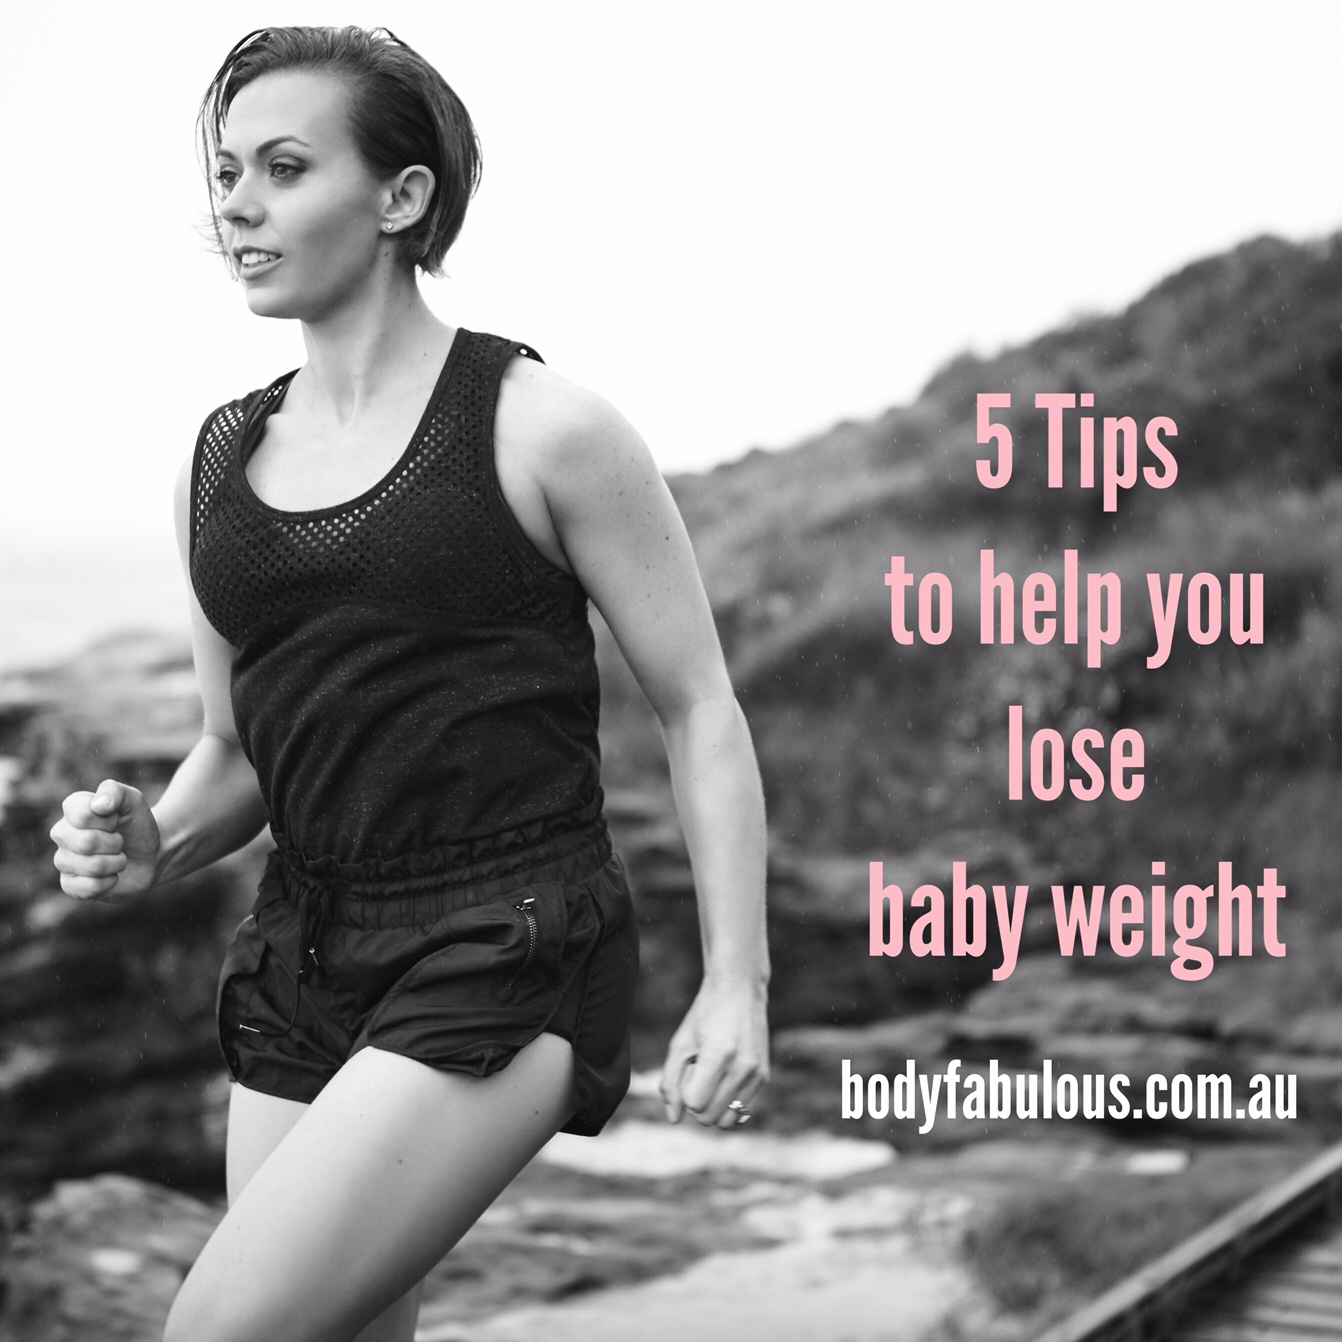 5 Top Tips to Lose Baby Weight